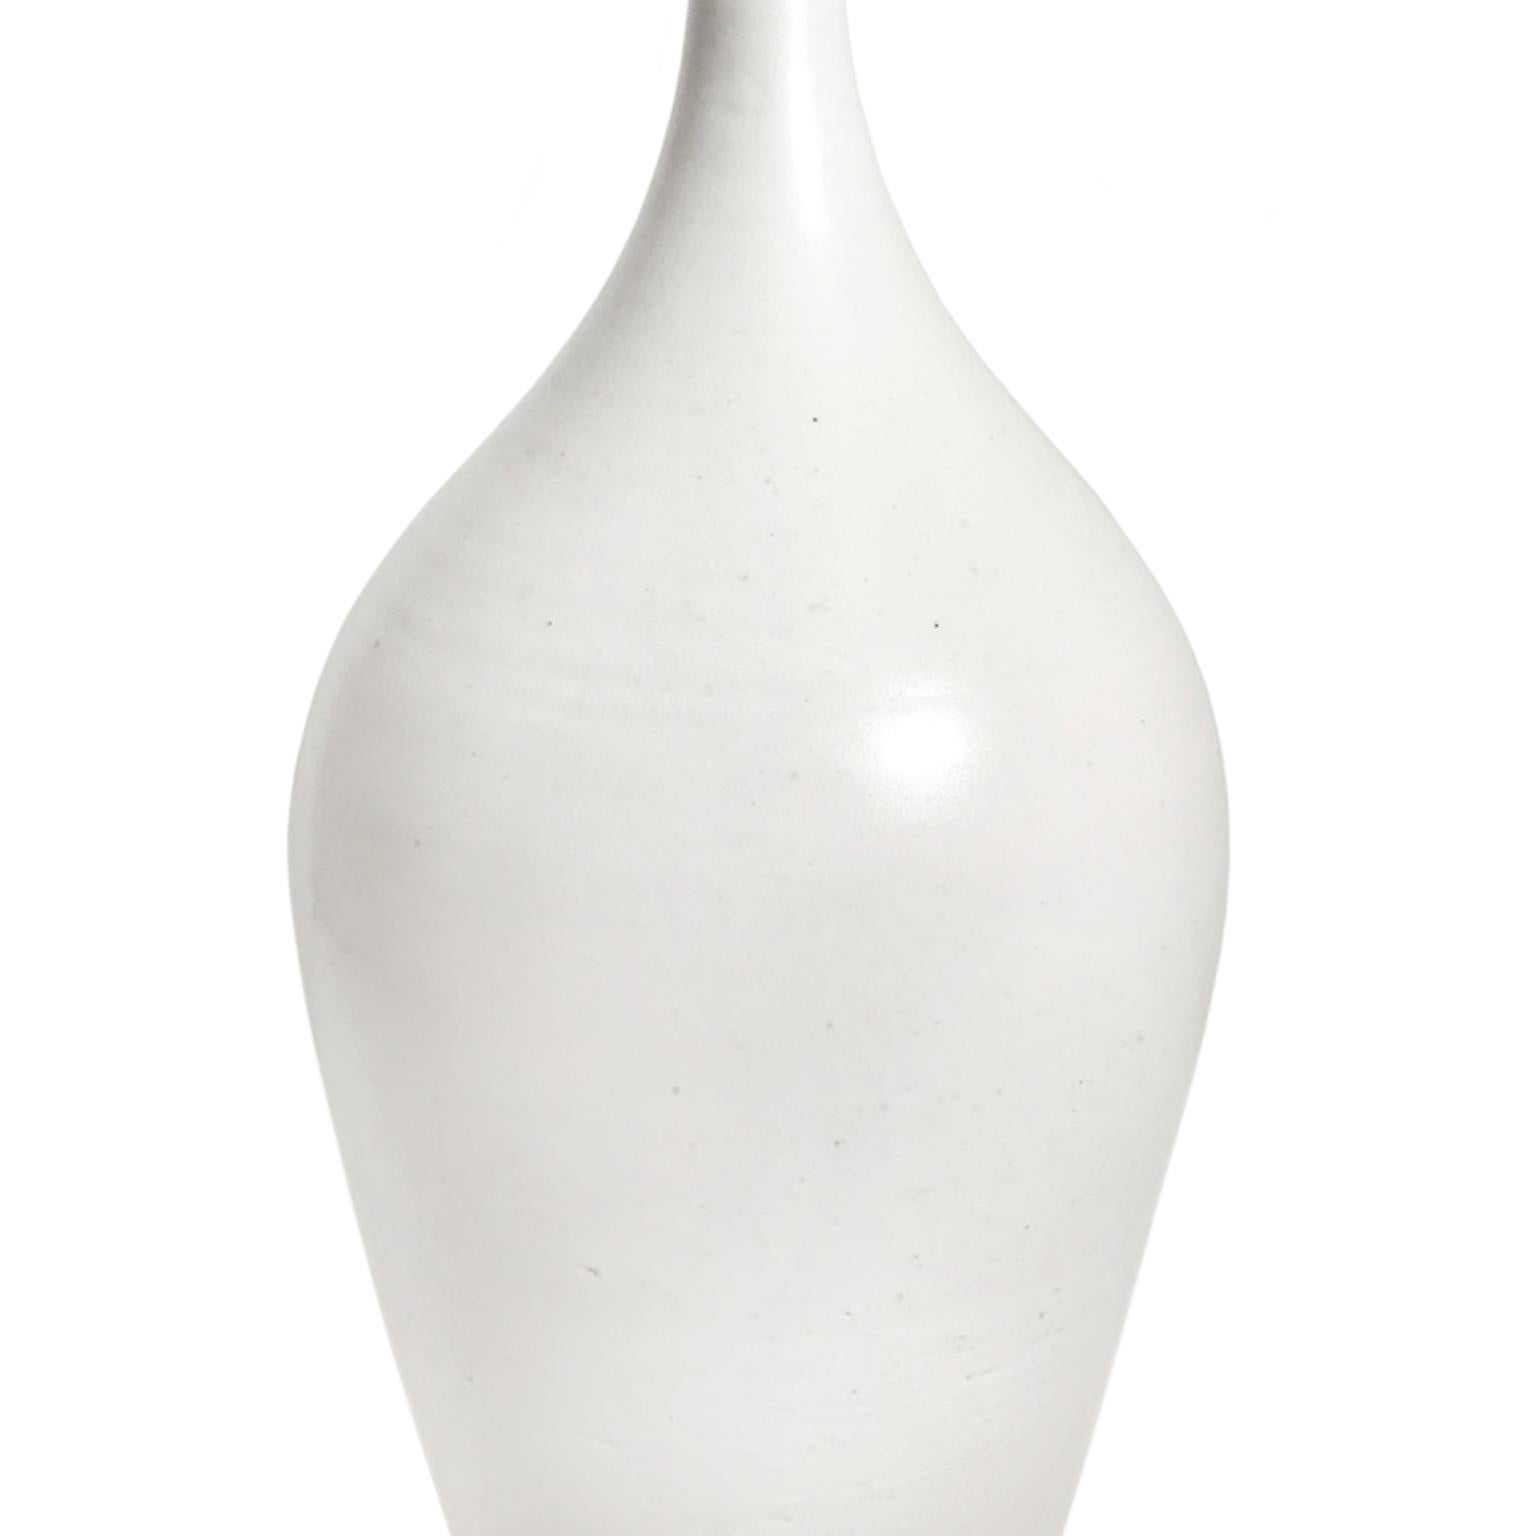 Alabaster glaze ceramic bottle #3 by Sandi Fellman, 2018. 

Veteran photographer Sandi Fellman's ceramic vessels are an exploration of a new medium. The forms, palettes, and sensuality of her photos can be found within each piece. The tactile